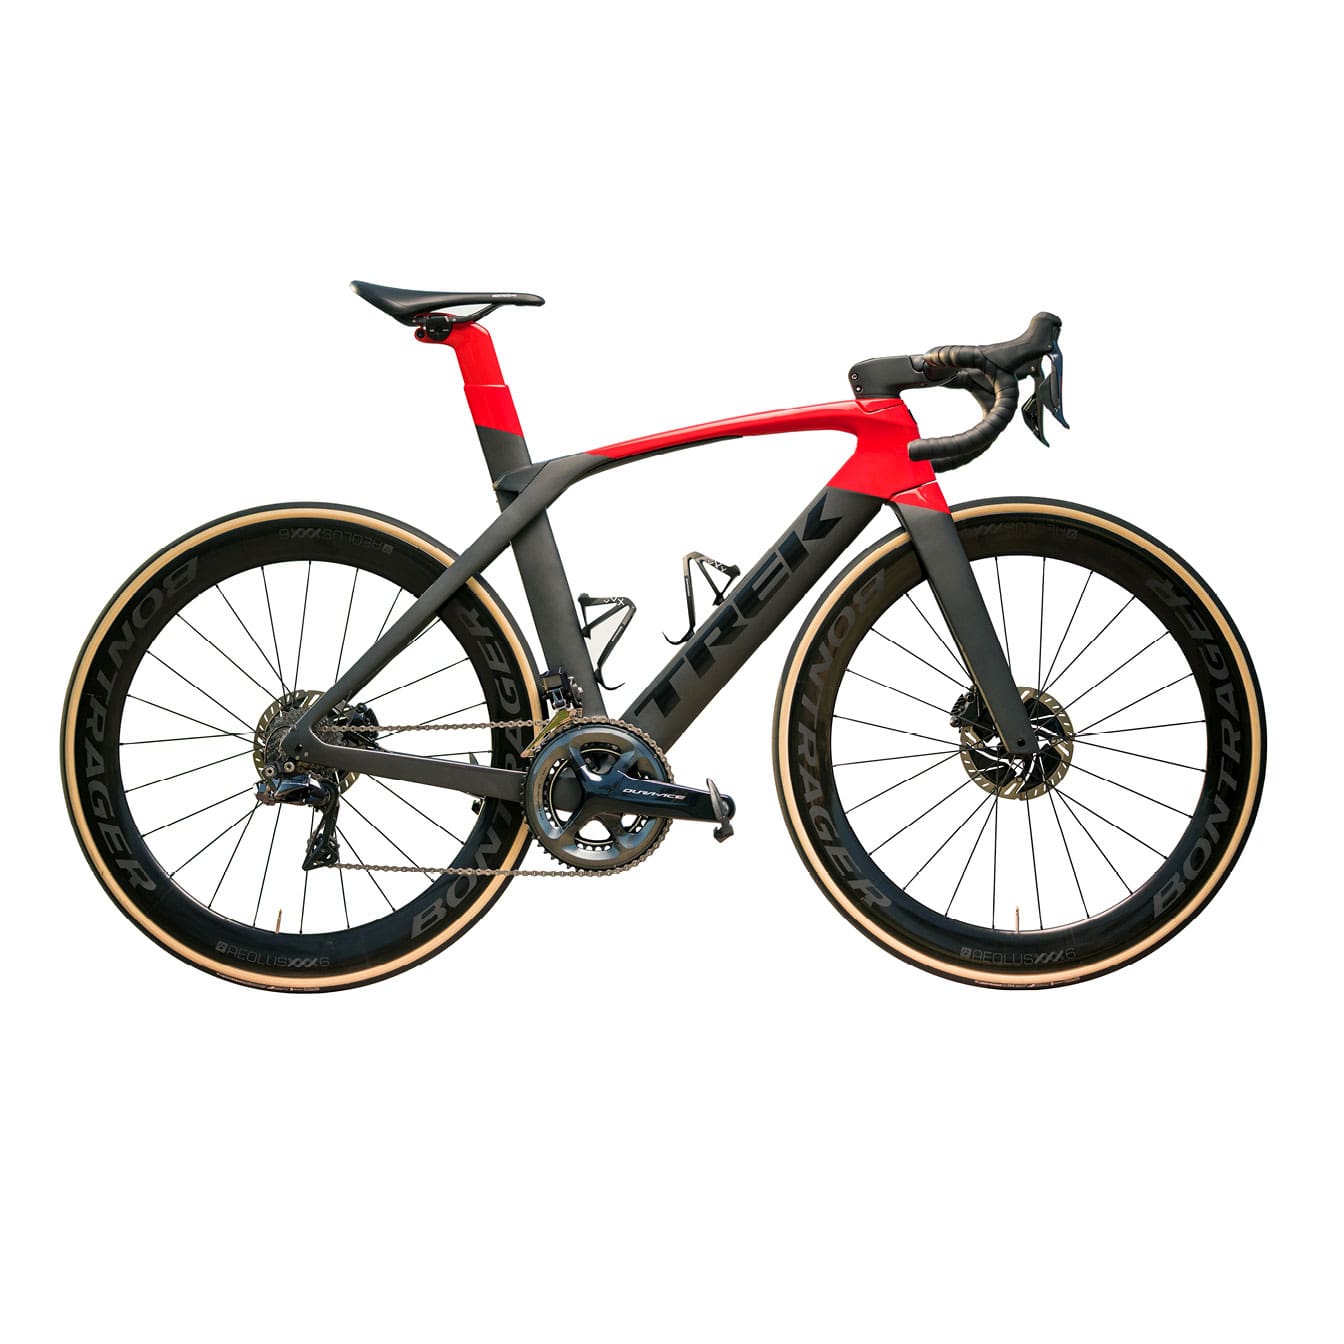 Photo of a black bike on a white background. The top of the bike frame is red.